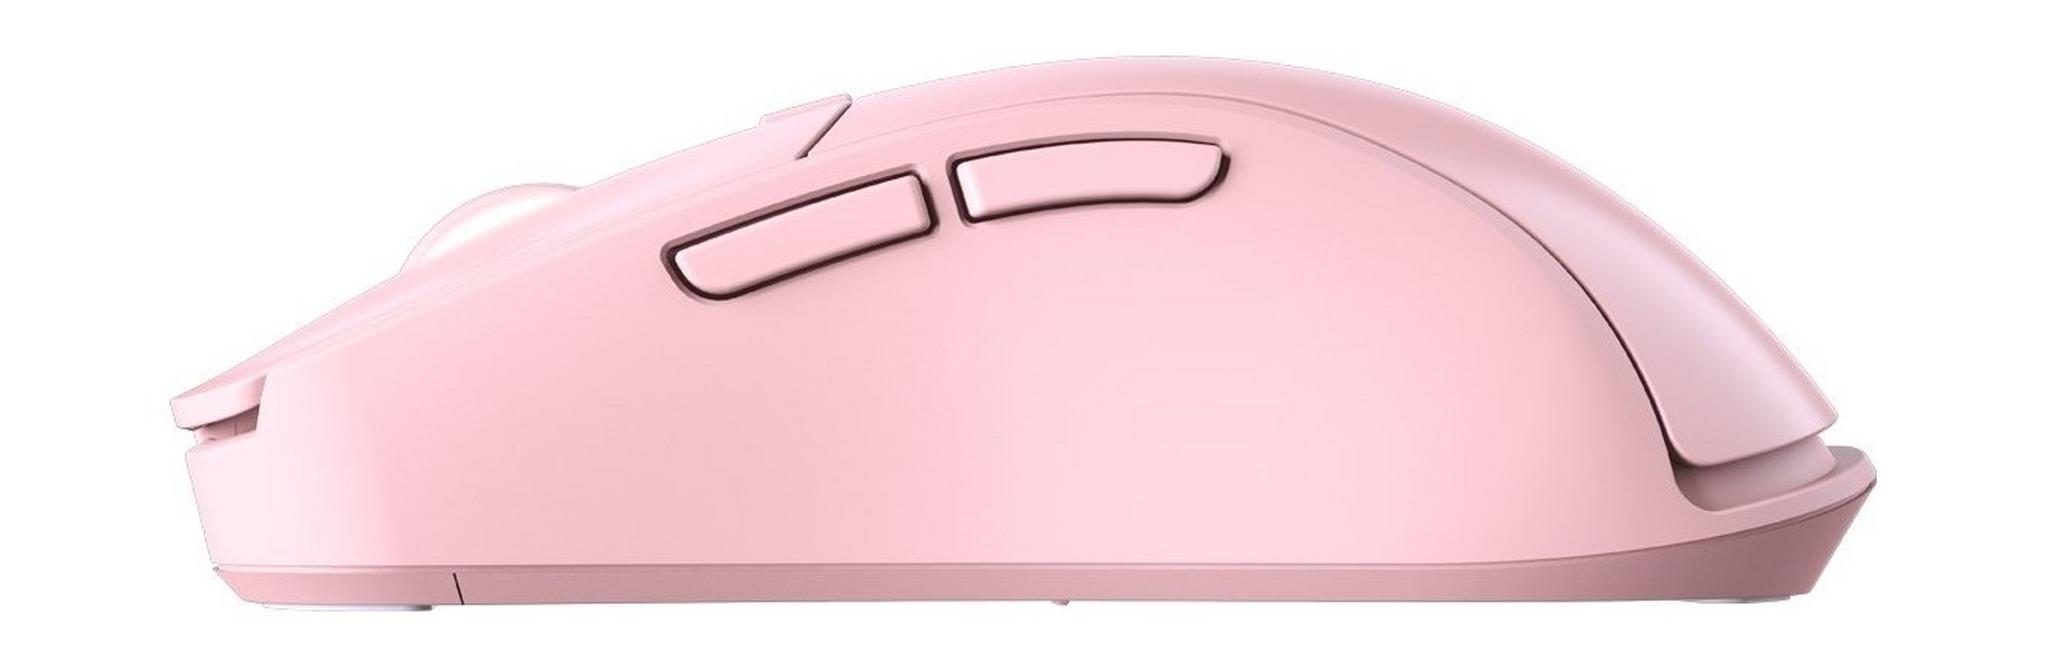 Cougar Surpassion RX Wireless Optical Gaming Mouse - Pink